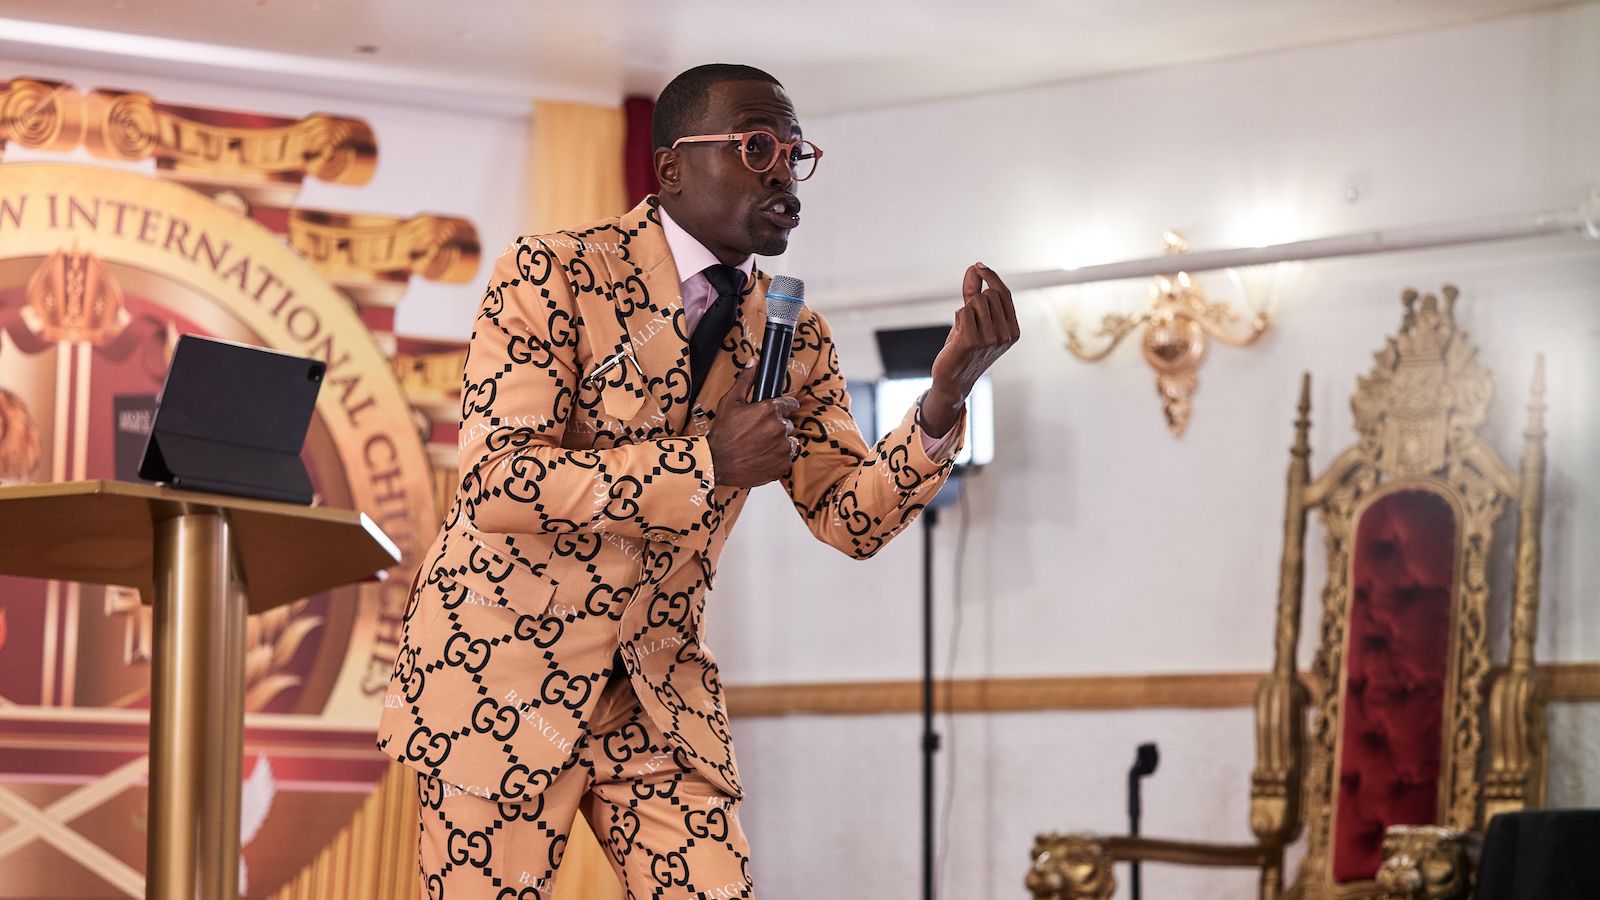 New York’s Controversial ‘Gucci Pastor’ Gets Robbed Of His Gucci